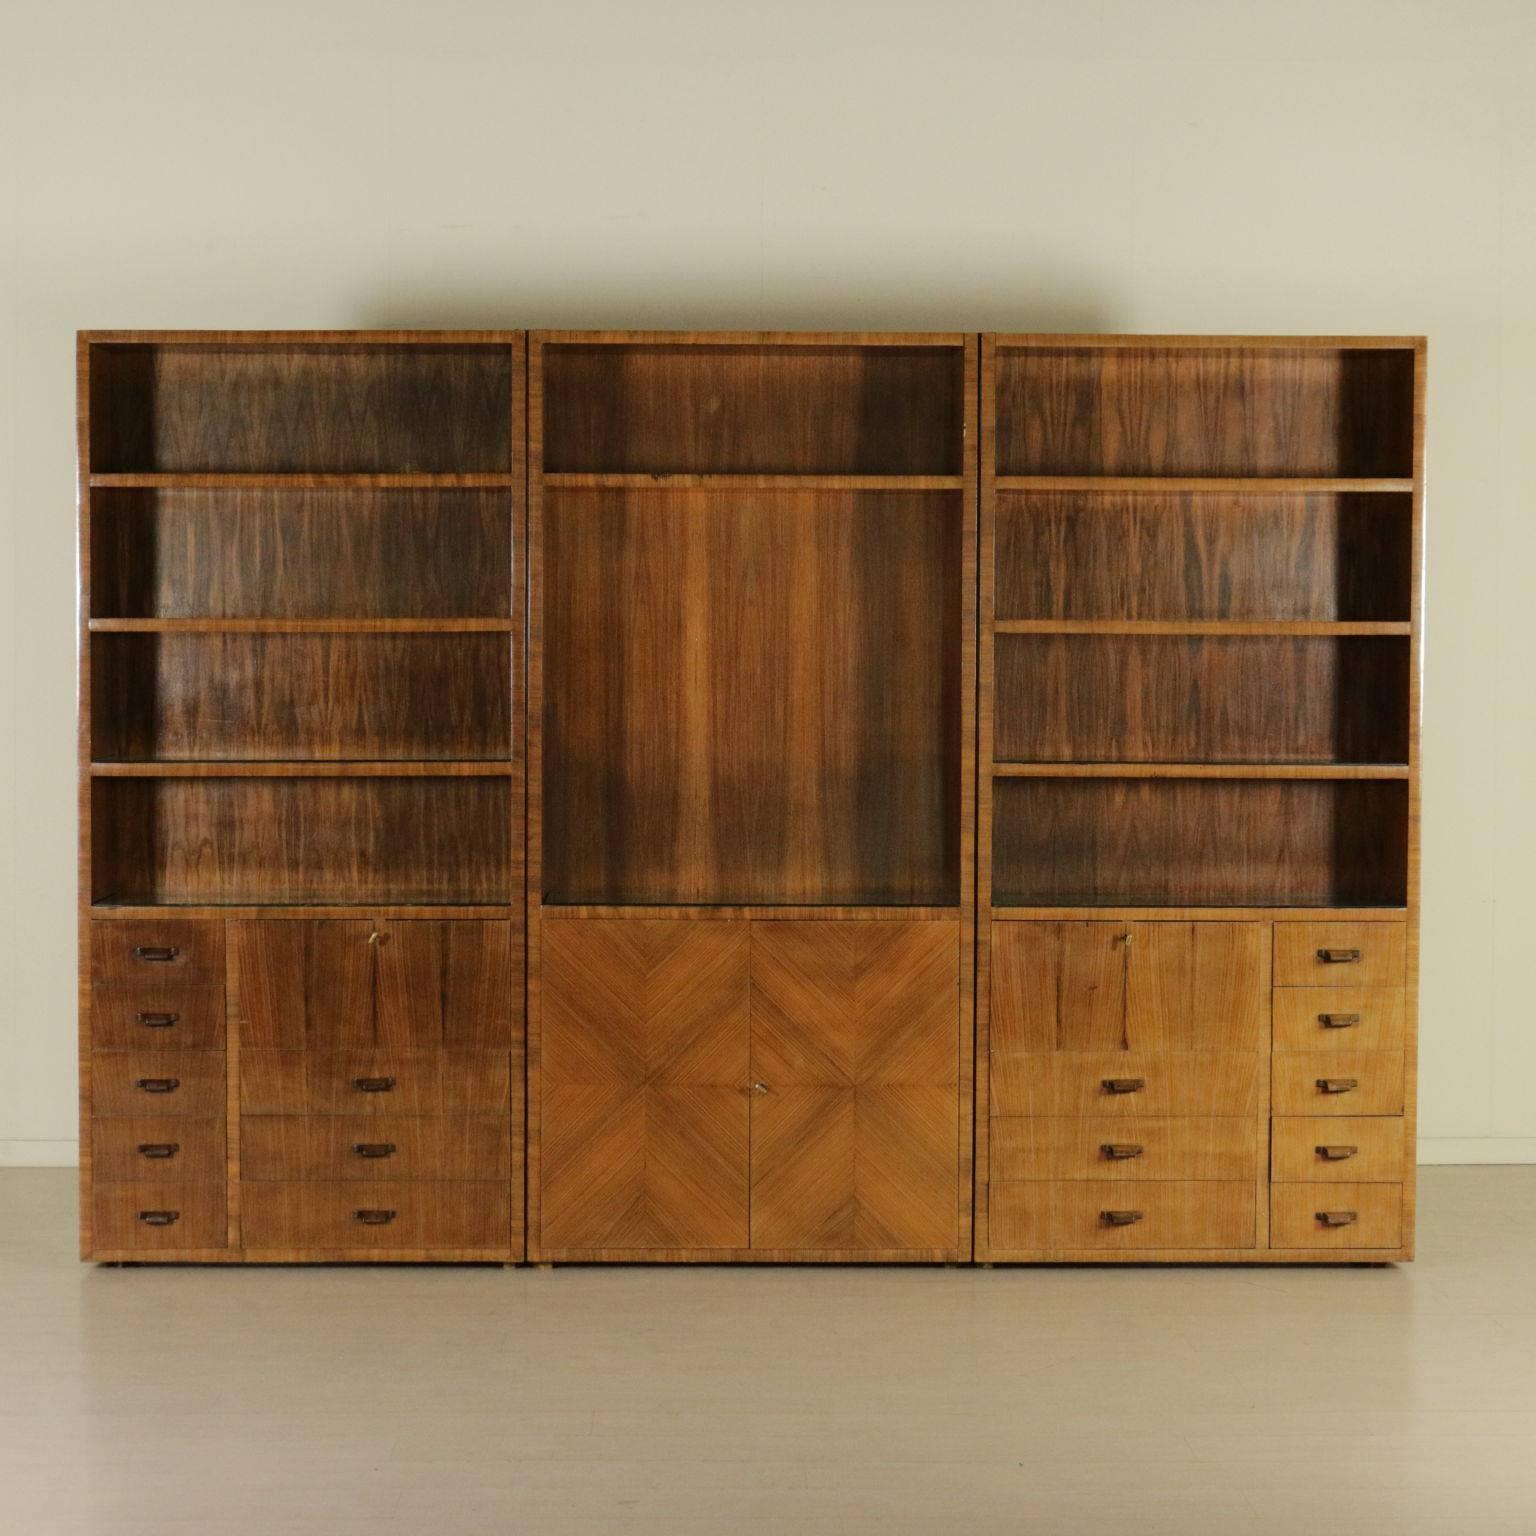 A bookcase, three elements with doors and drawers. Rosewood veneer, transparent glass leaning on some shelves. Manufactured in Italy, 1940s.